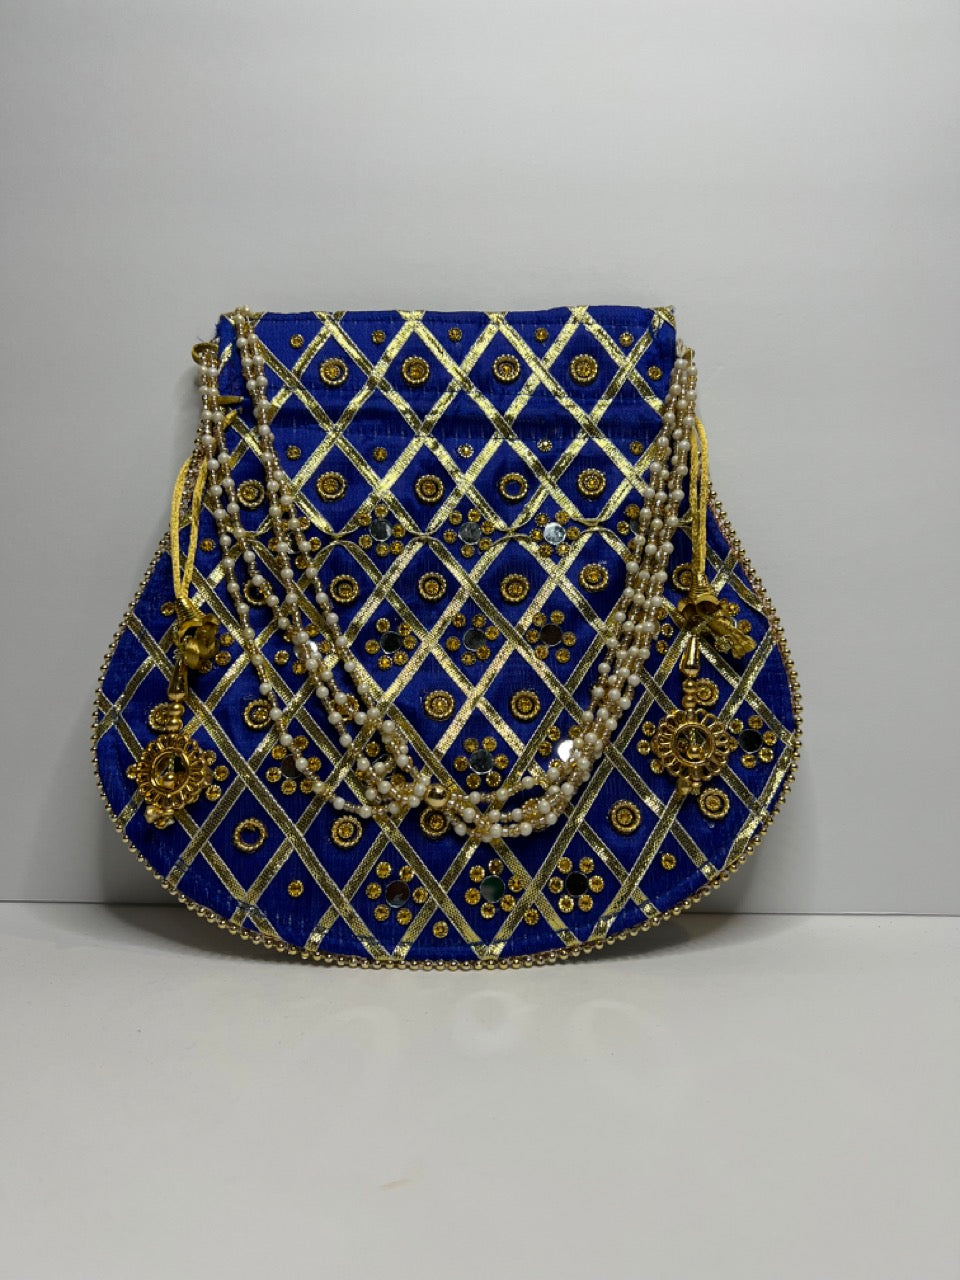 Fashion Coin Purse - Get Best Price from Manufacturers & Suppliers in India